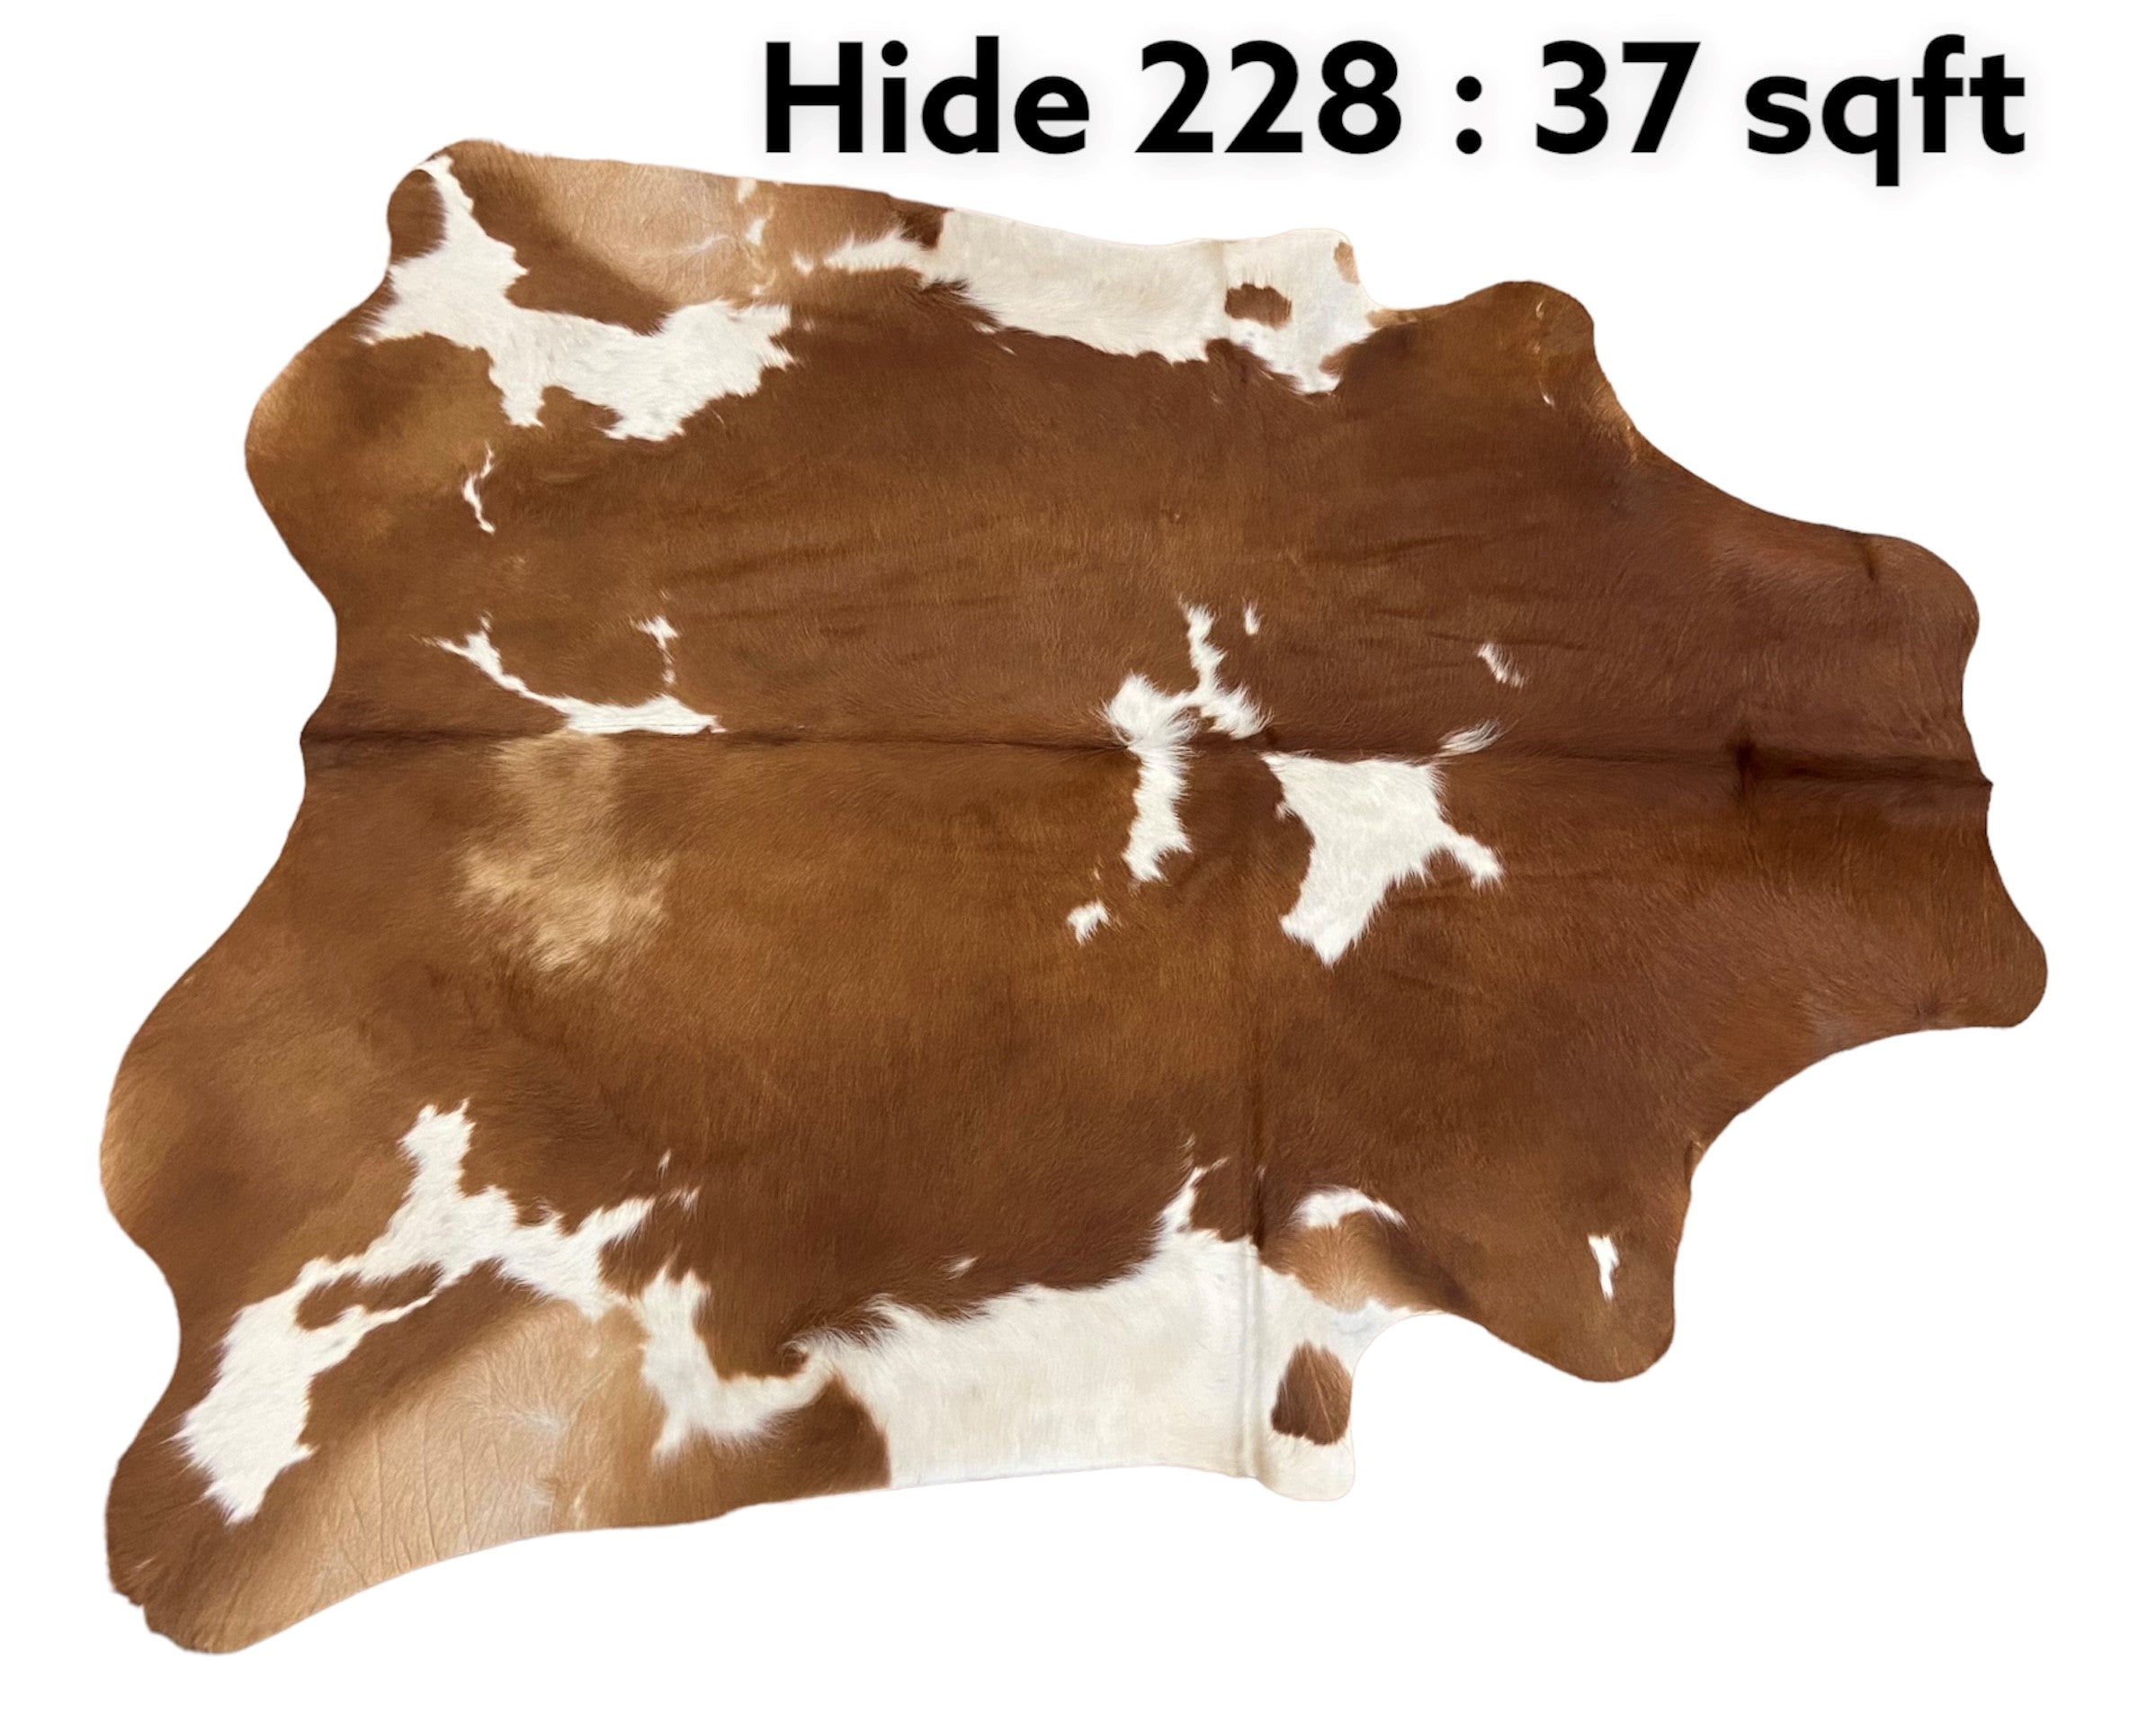 Natural Hair On Cow Hide : This Hide Is Perfect For Wall Hanging, Leather Rugs, Leather Upholstery & Leather Accessories. (Hide228)